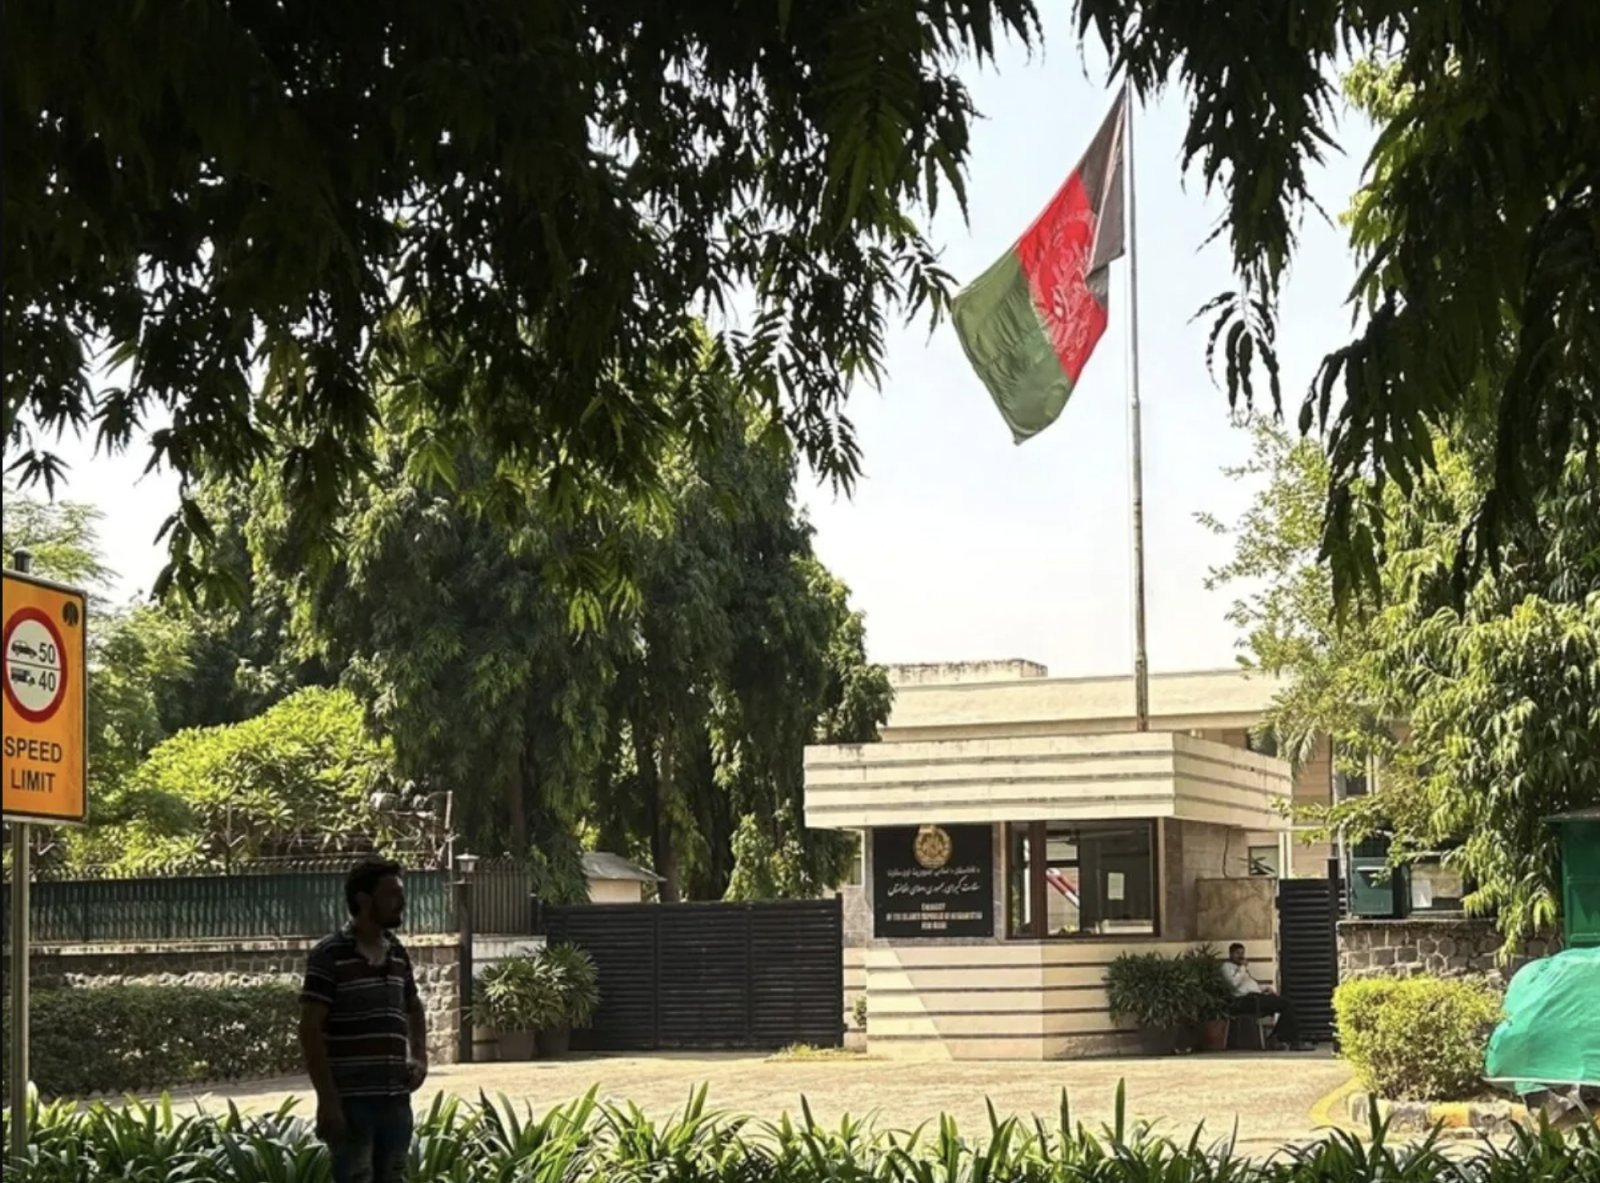 Rift in relations between India and Afghanistan, Embassy packed up from Delhi